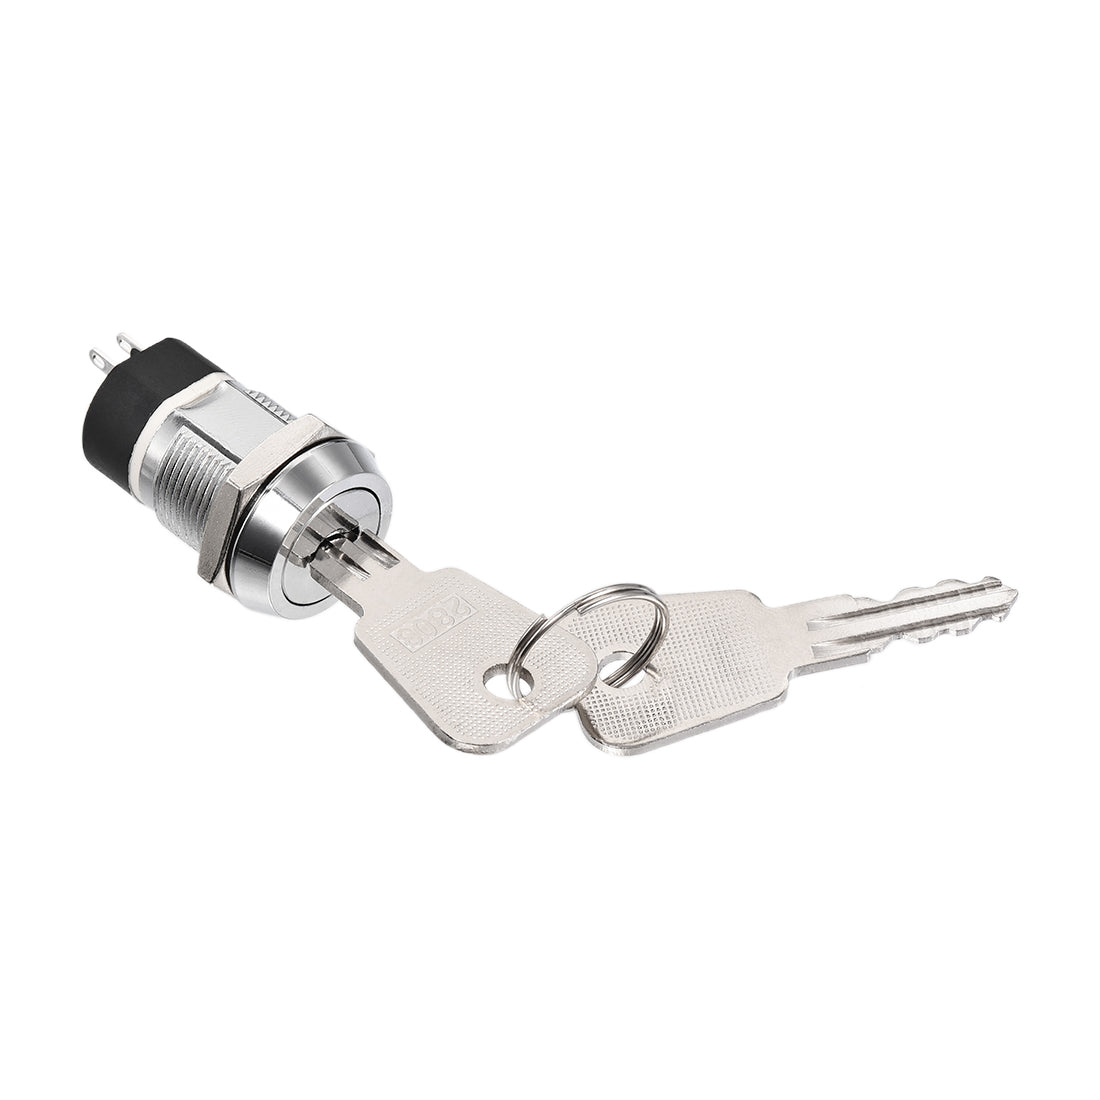 uxcell Uxcell 19mm 2 Positions Key Locking Push Button Switch With 2 Keys 2NC-2NO S2803